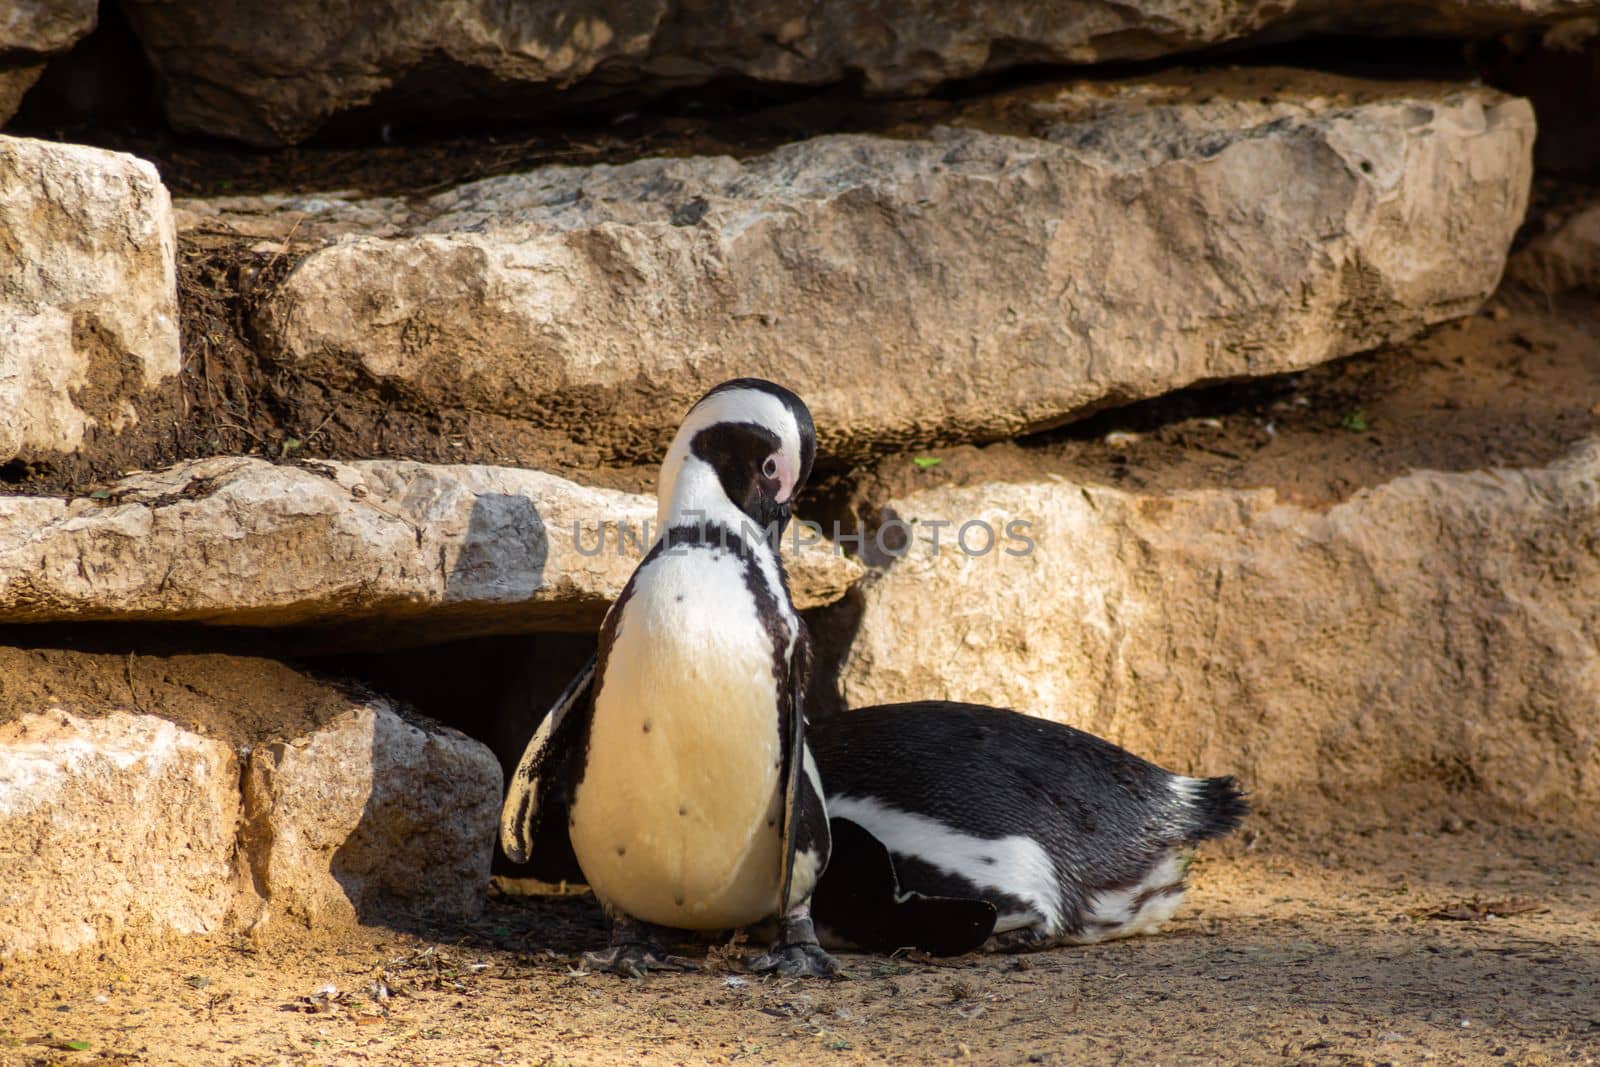 Penguin in a zoo in a warm climate.